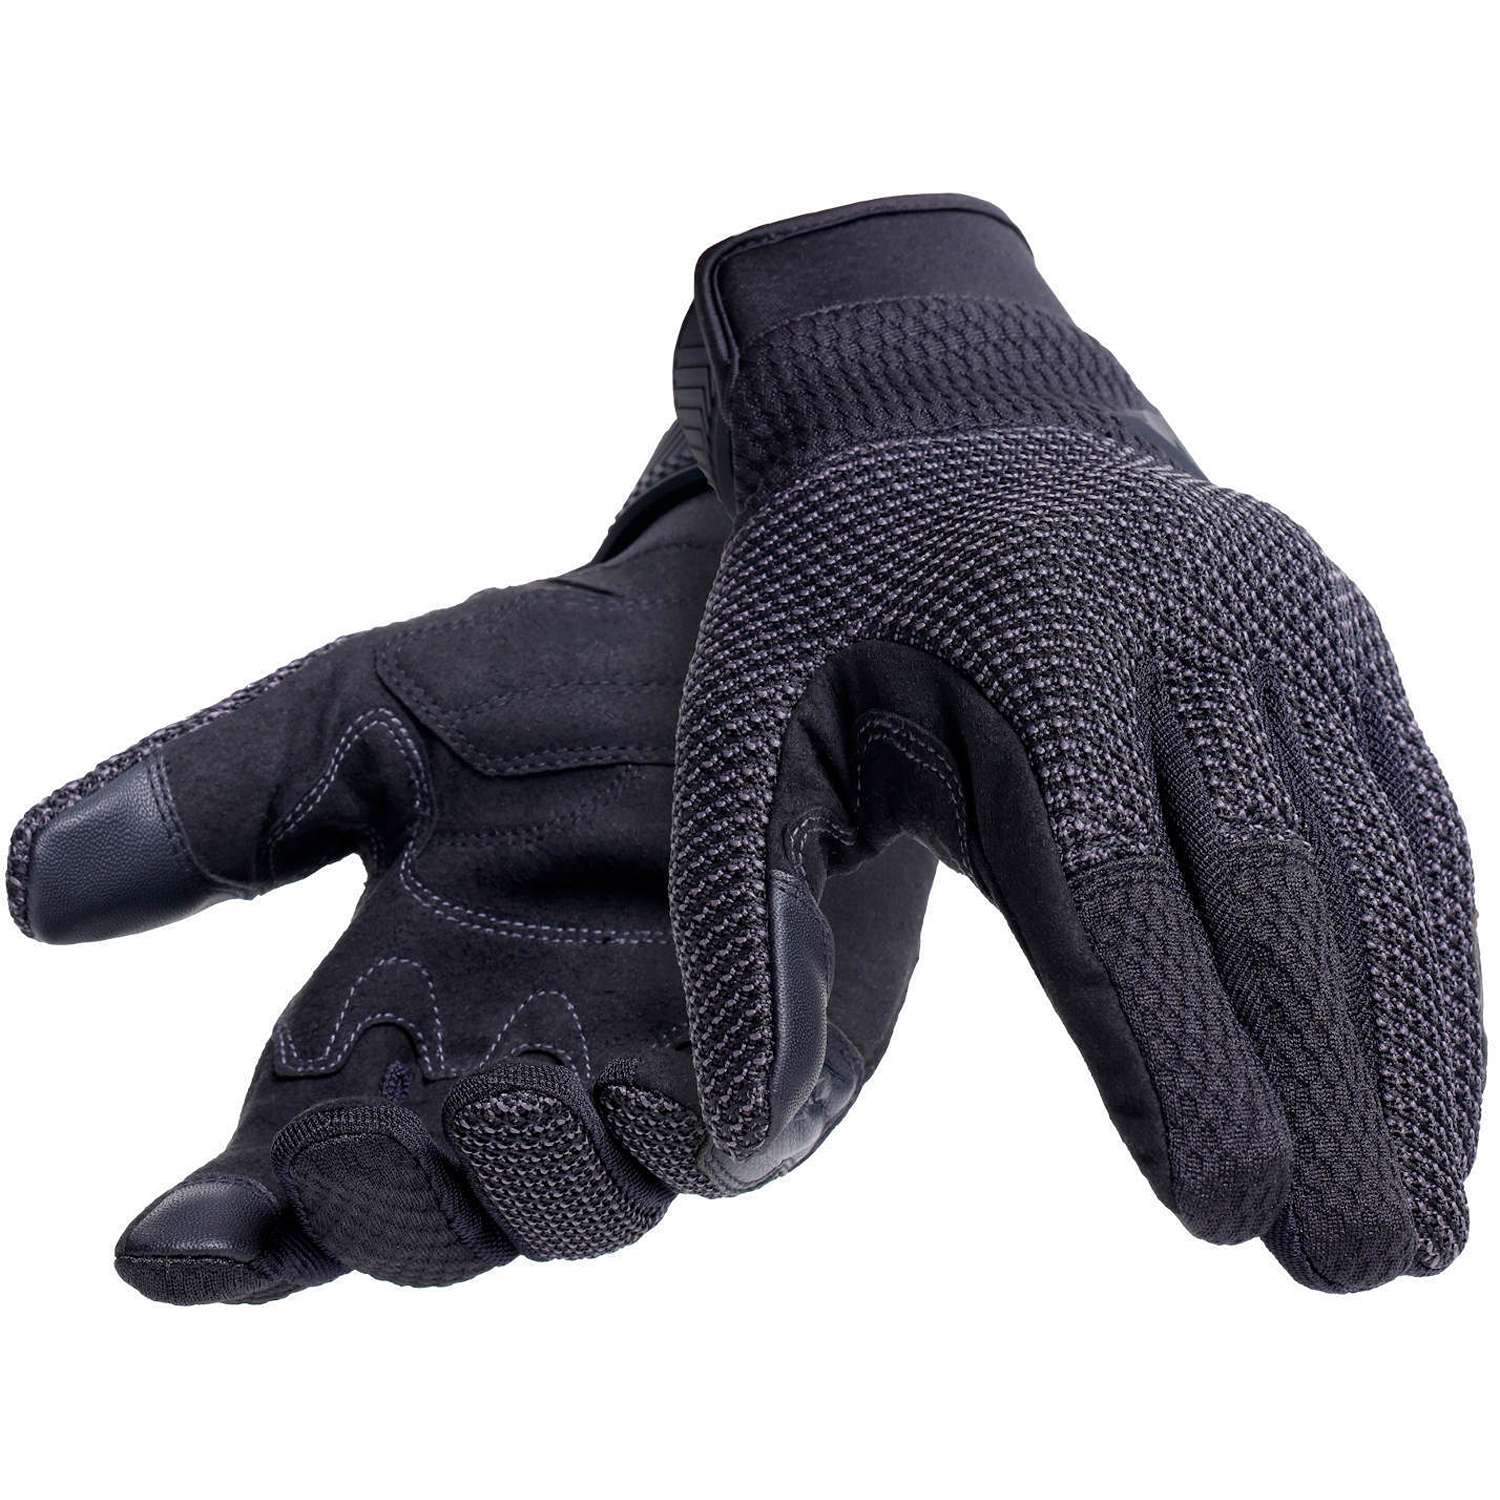 Image of Dainese Torino Gloves Black Anthracite Size S EN